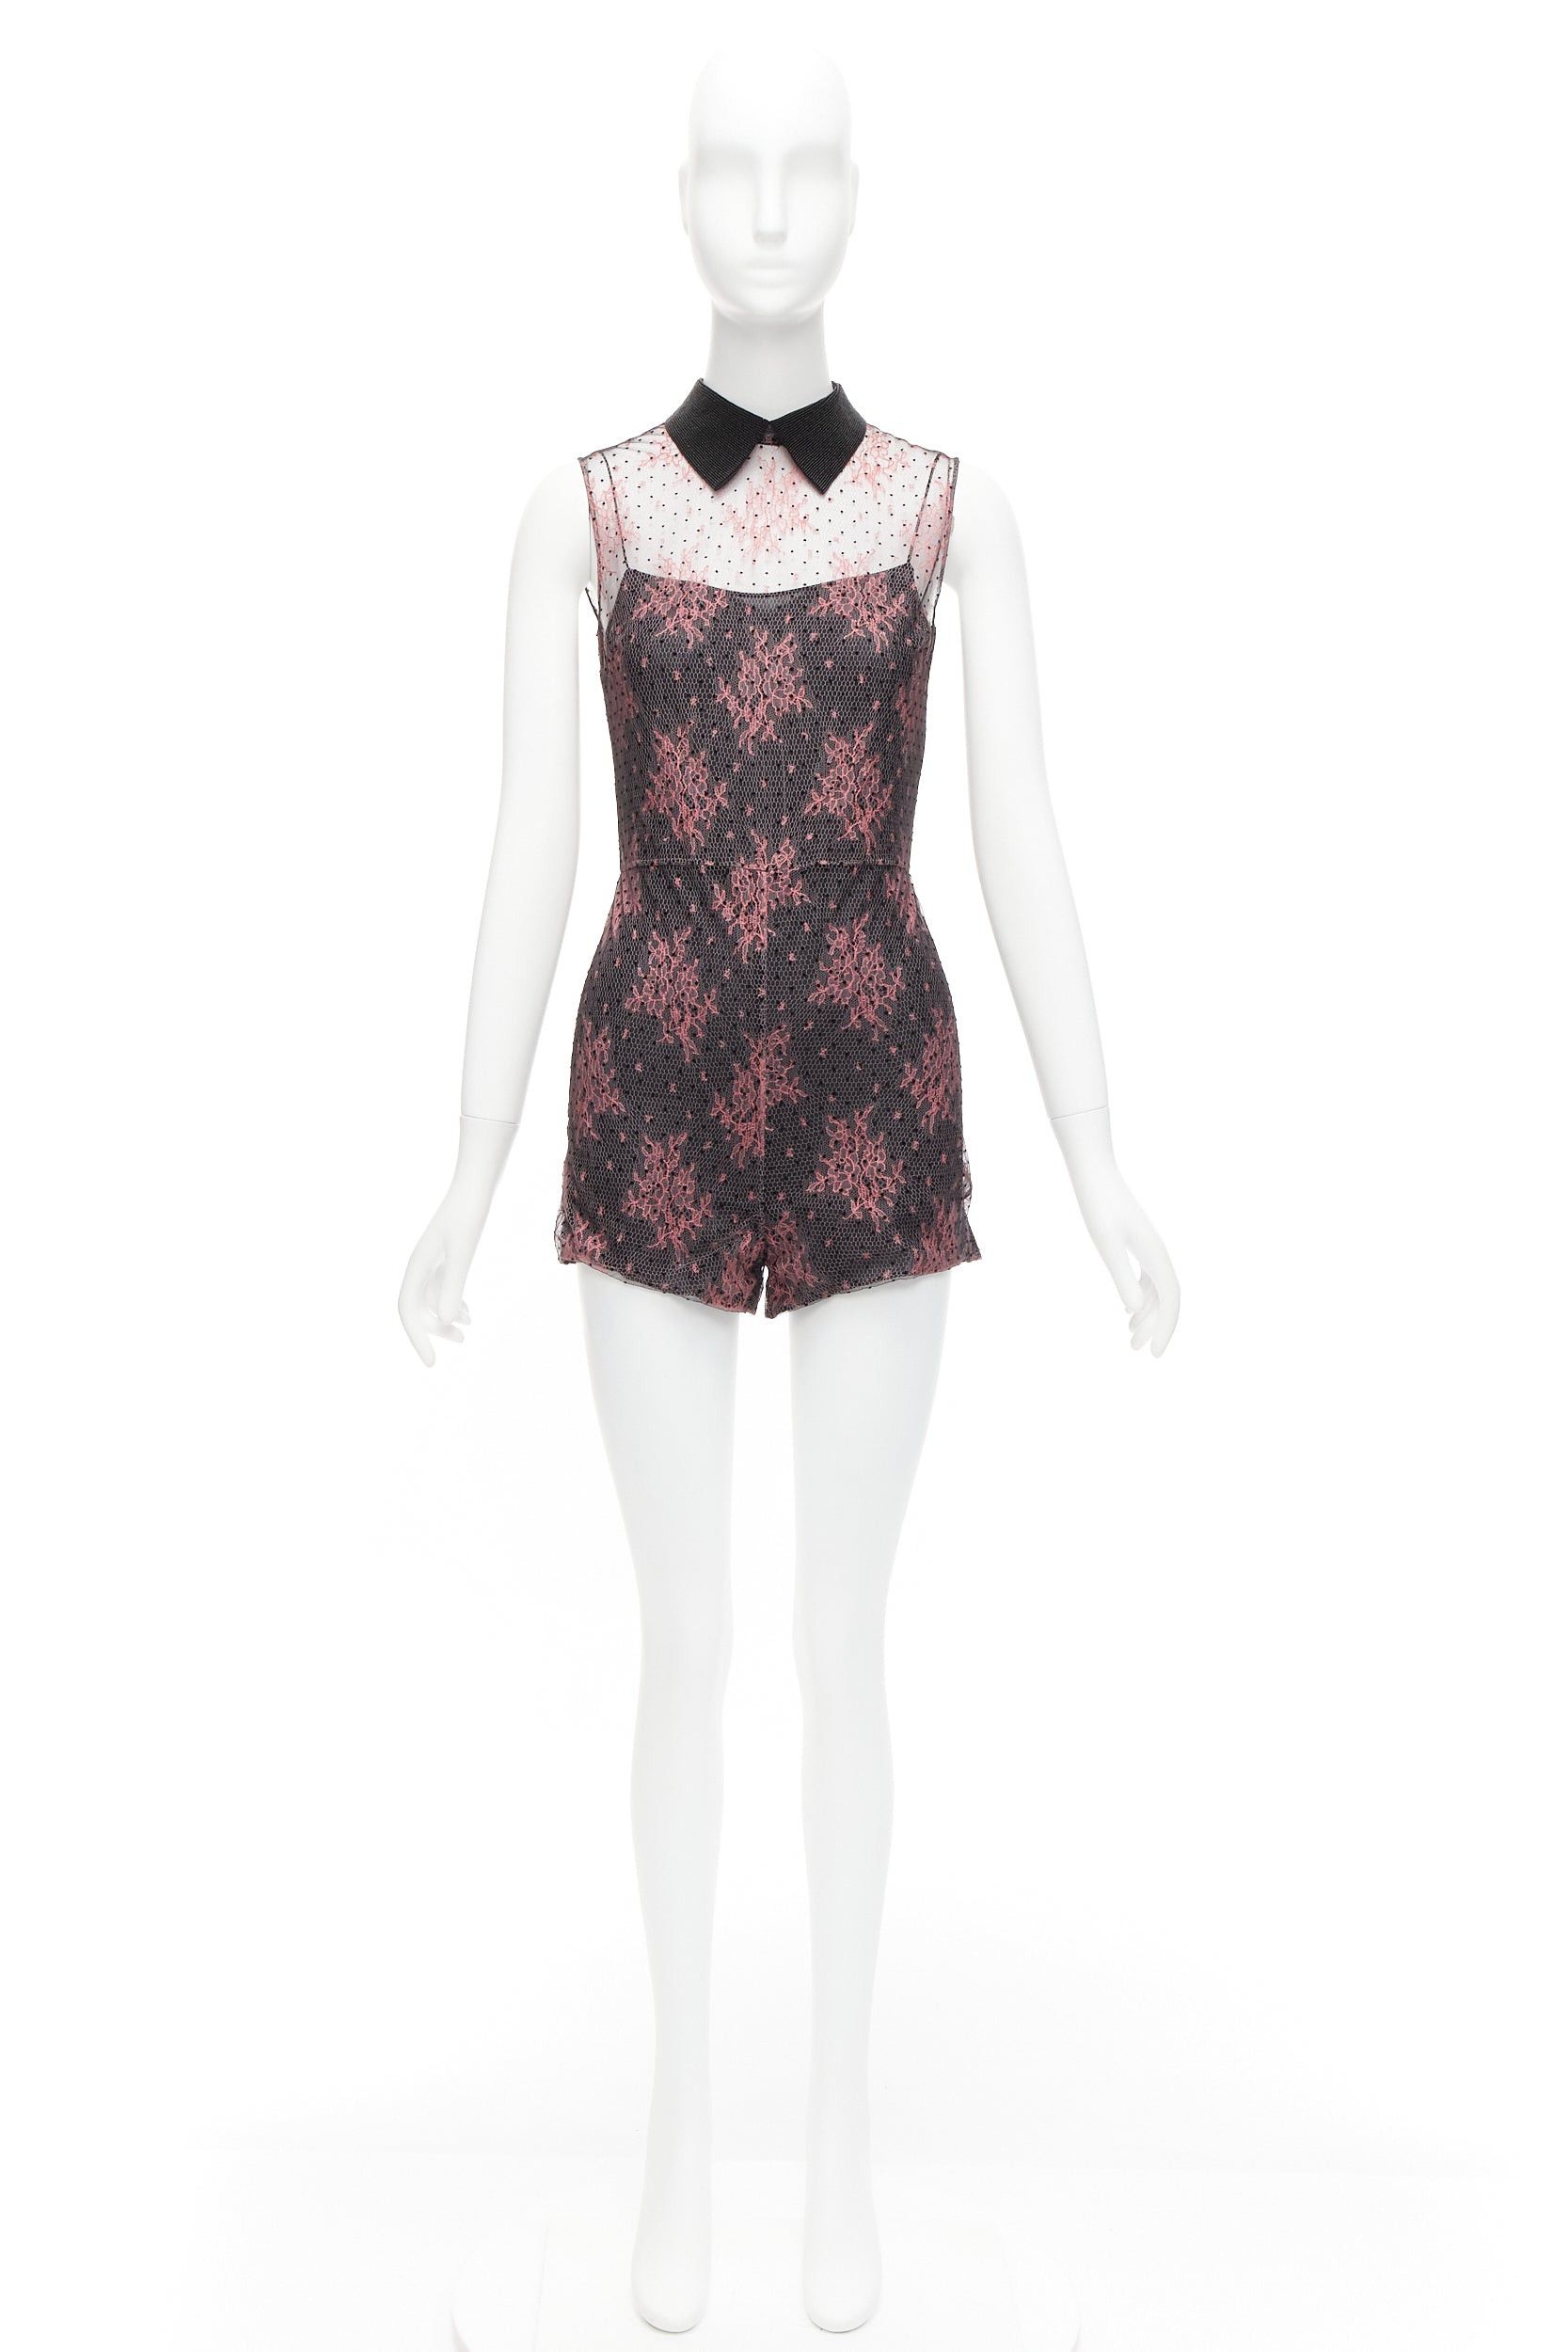 Dior CHRISTIAN DIOR black pink intricate lace overlay playsuit romper FR34 XS Size 26" / US 2 / IT 38 - 9 Preview